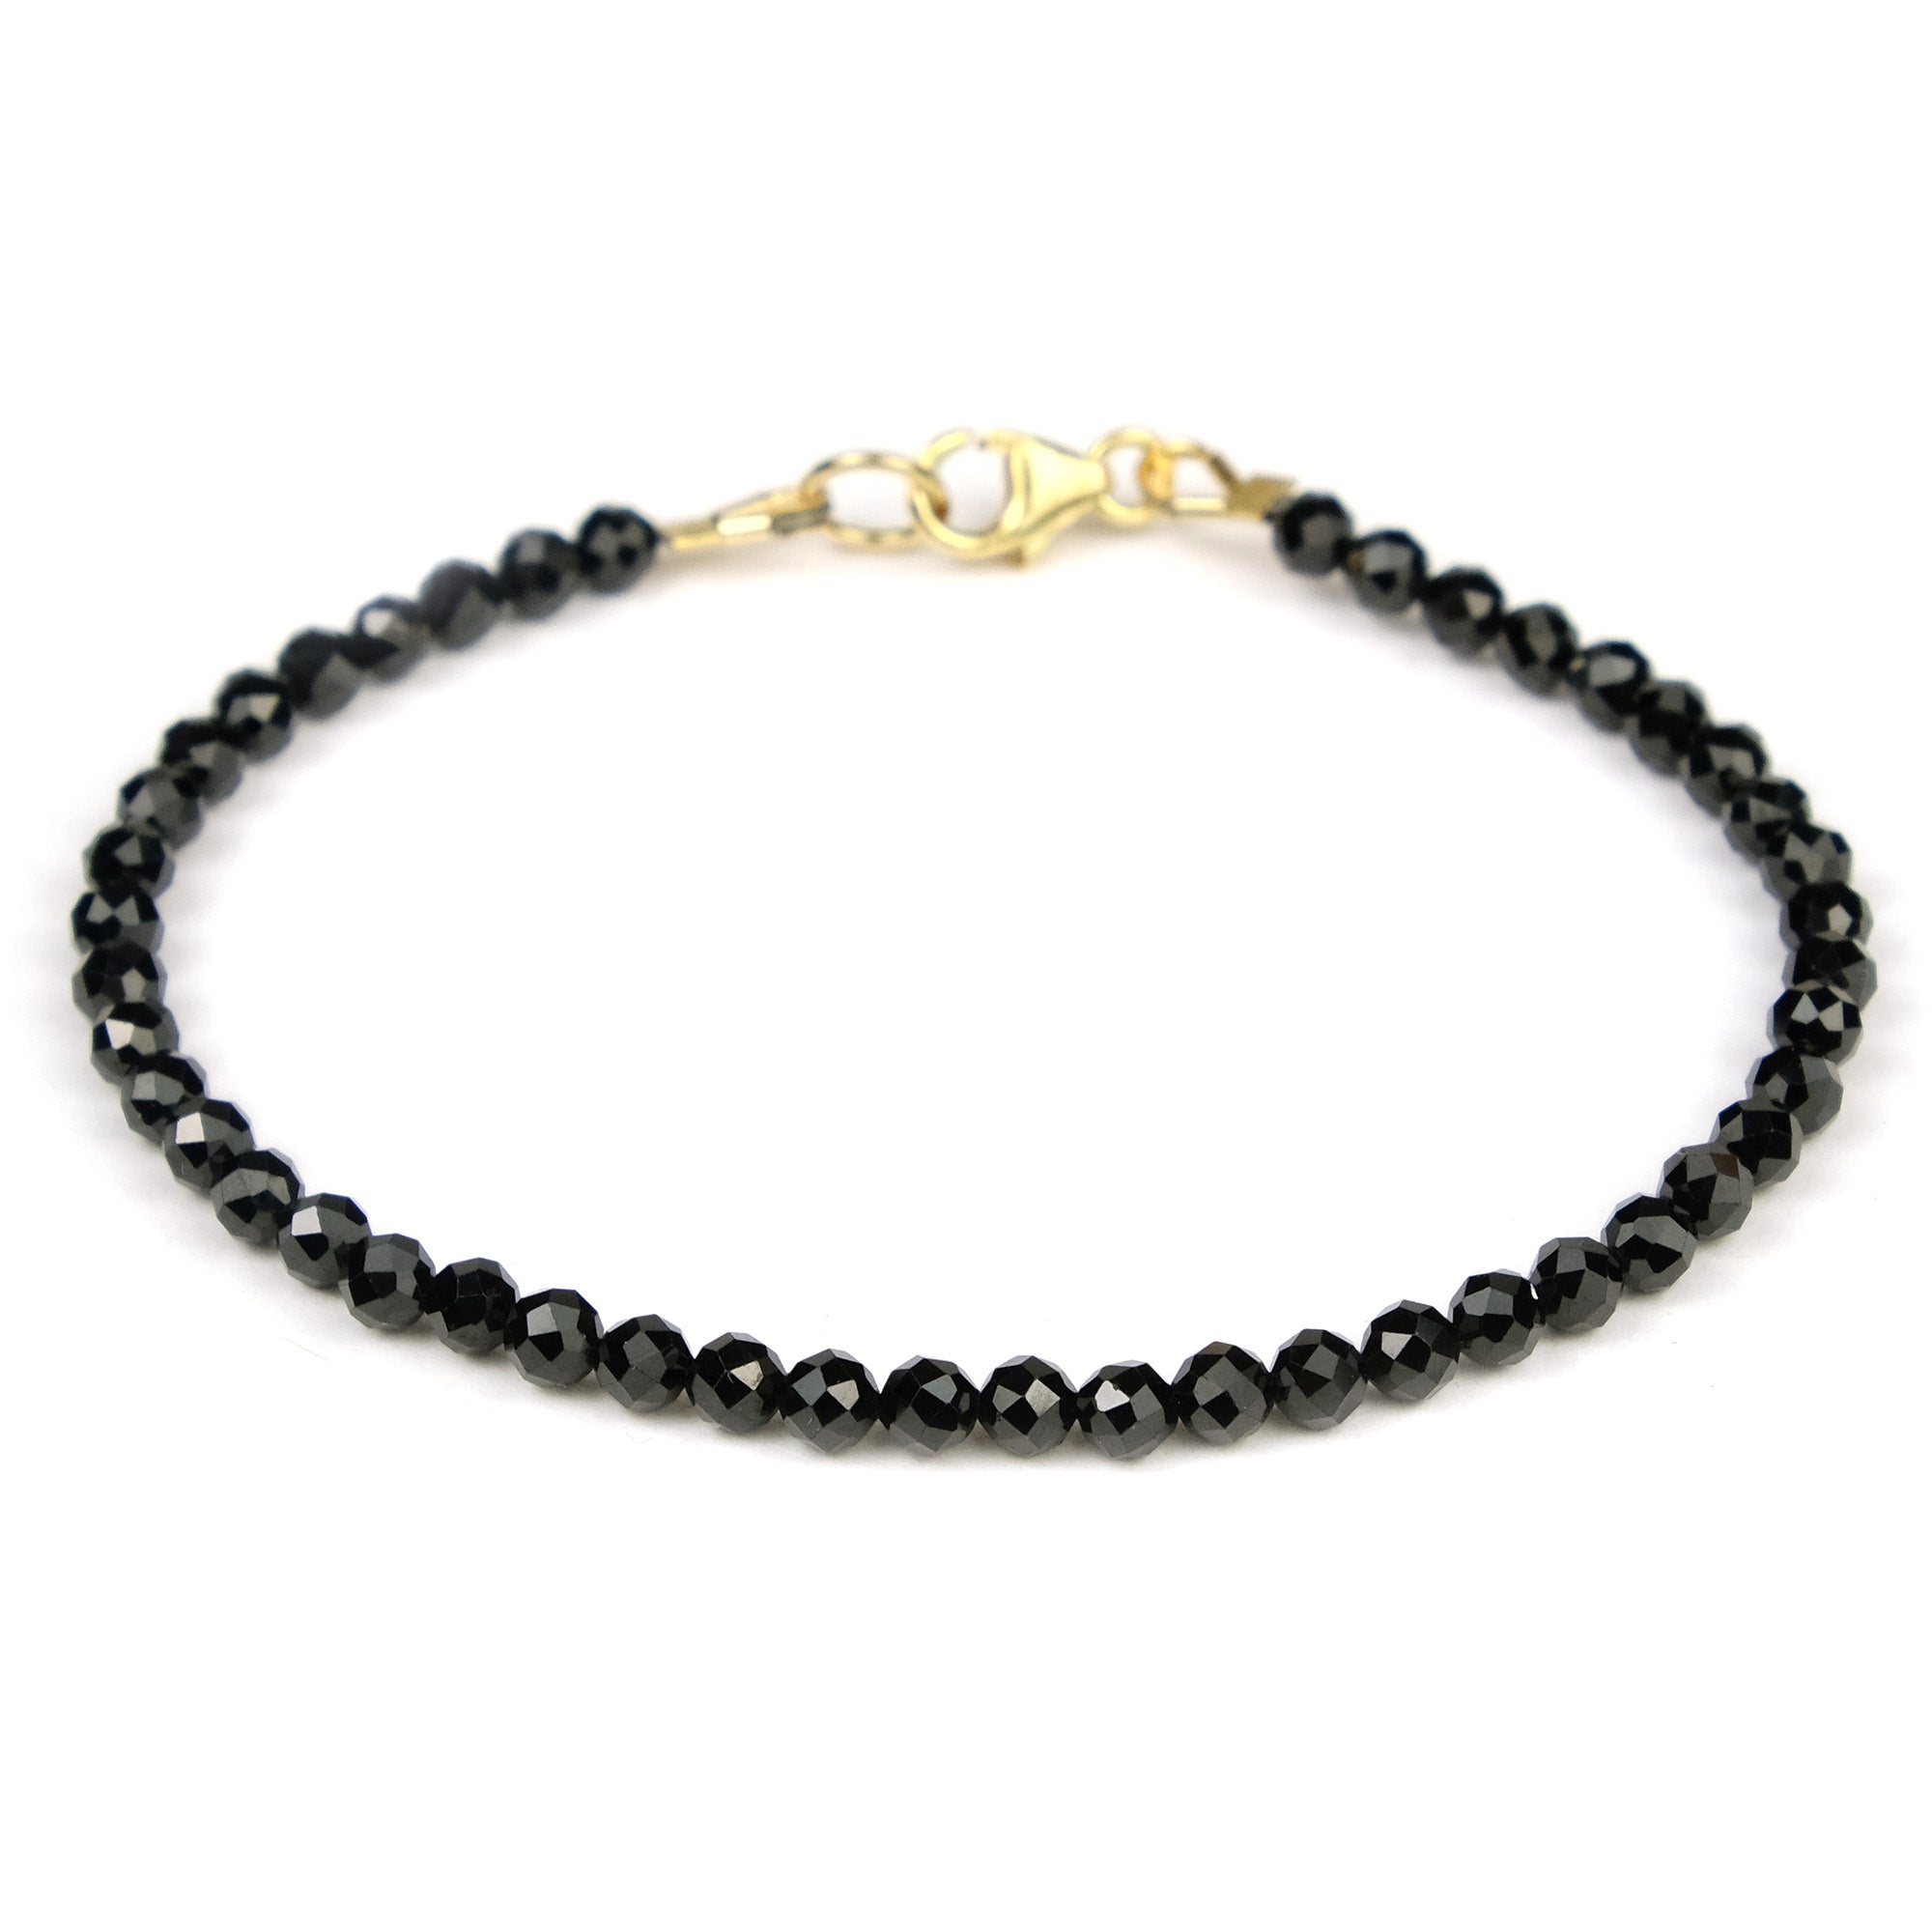 Black Tourmaline 3mm Faceted Round Bracelet with Sterling Silver